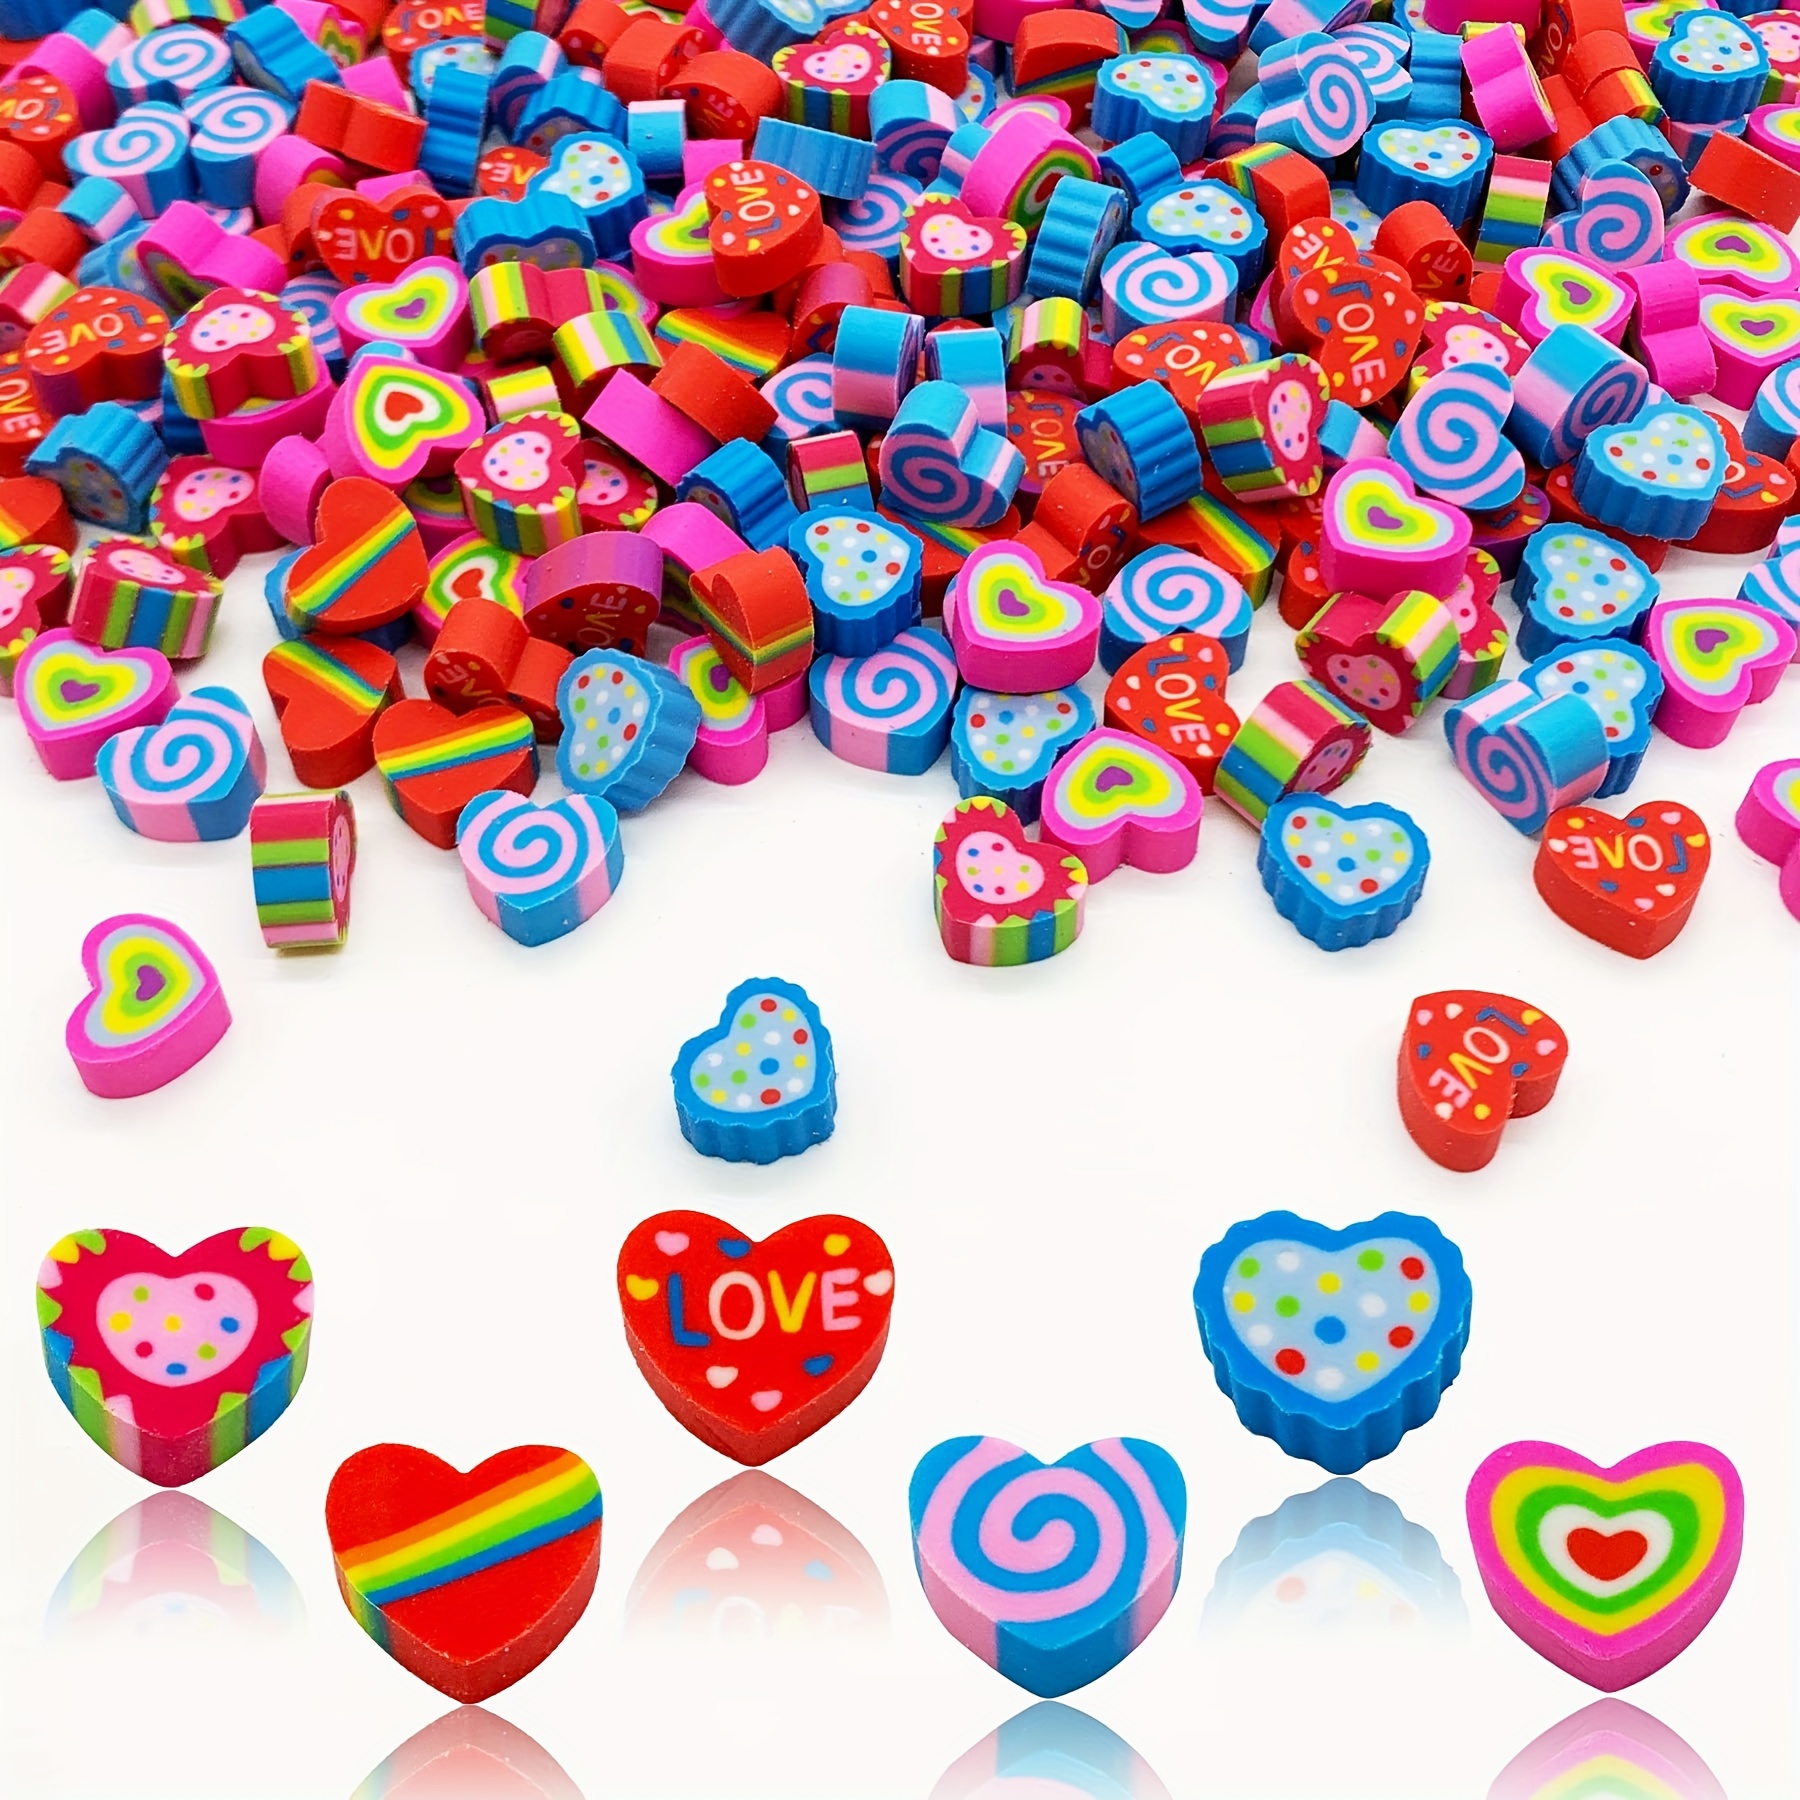 36 Sheets Valentine Stickers for Kids: Valentine's Day Love Heart Stickers  Bulk Kit Cards Craft Decorative for Girl Boy Party Favors Gifts Weddings